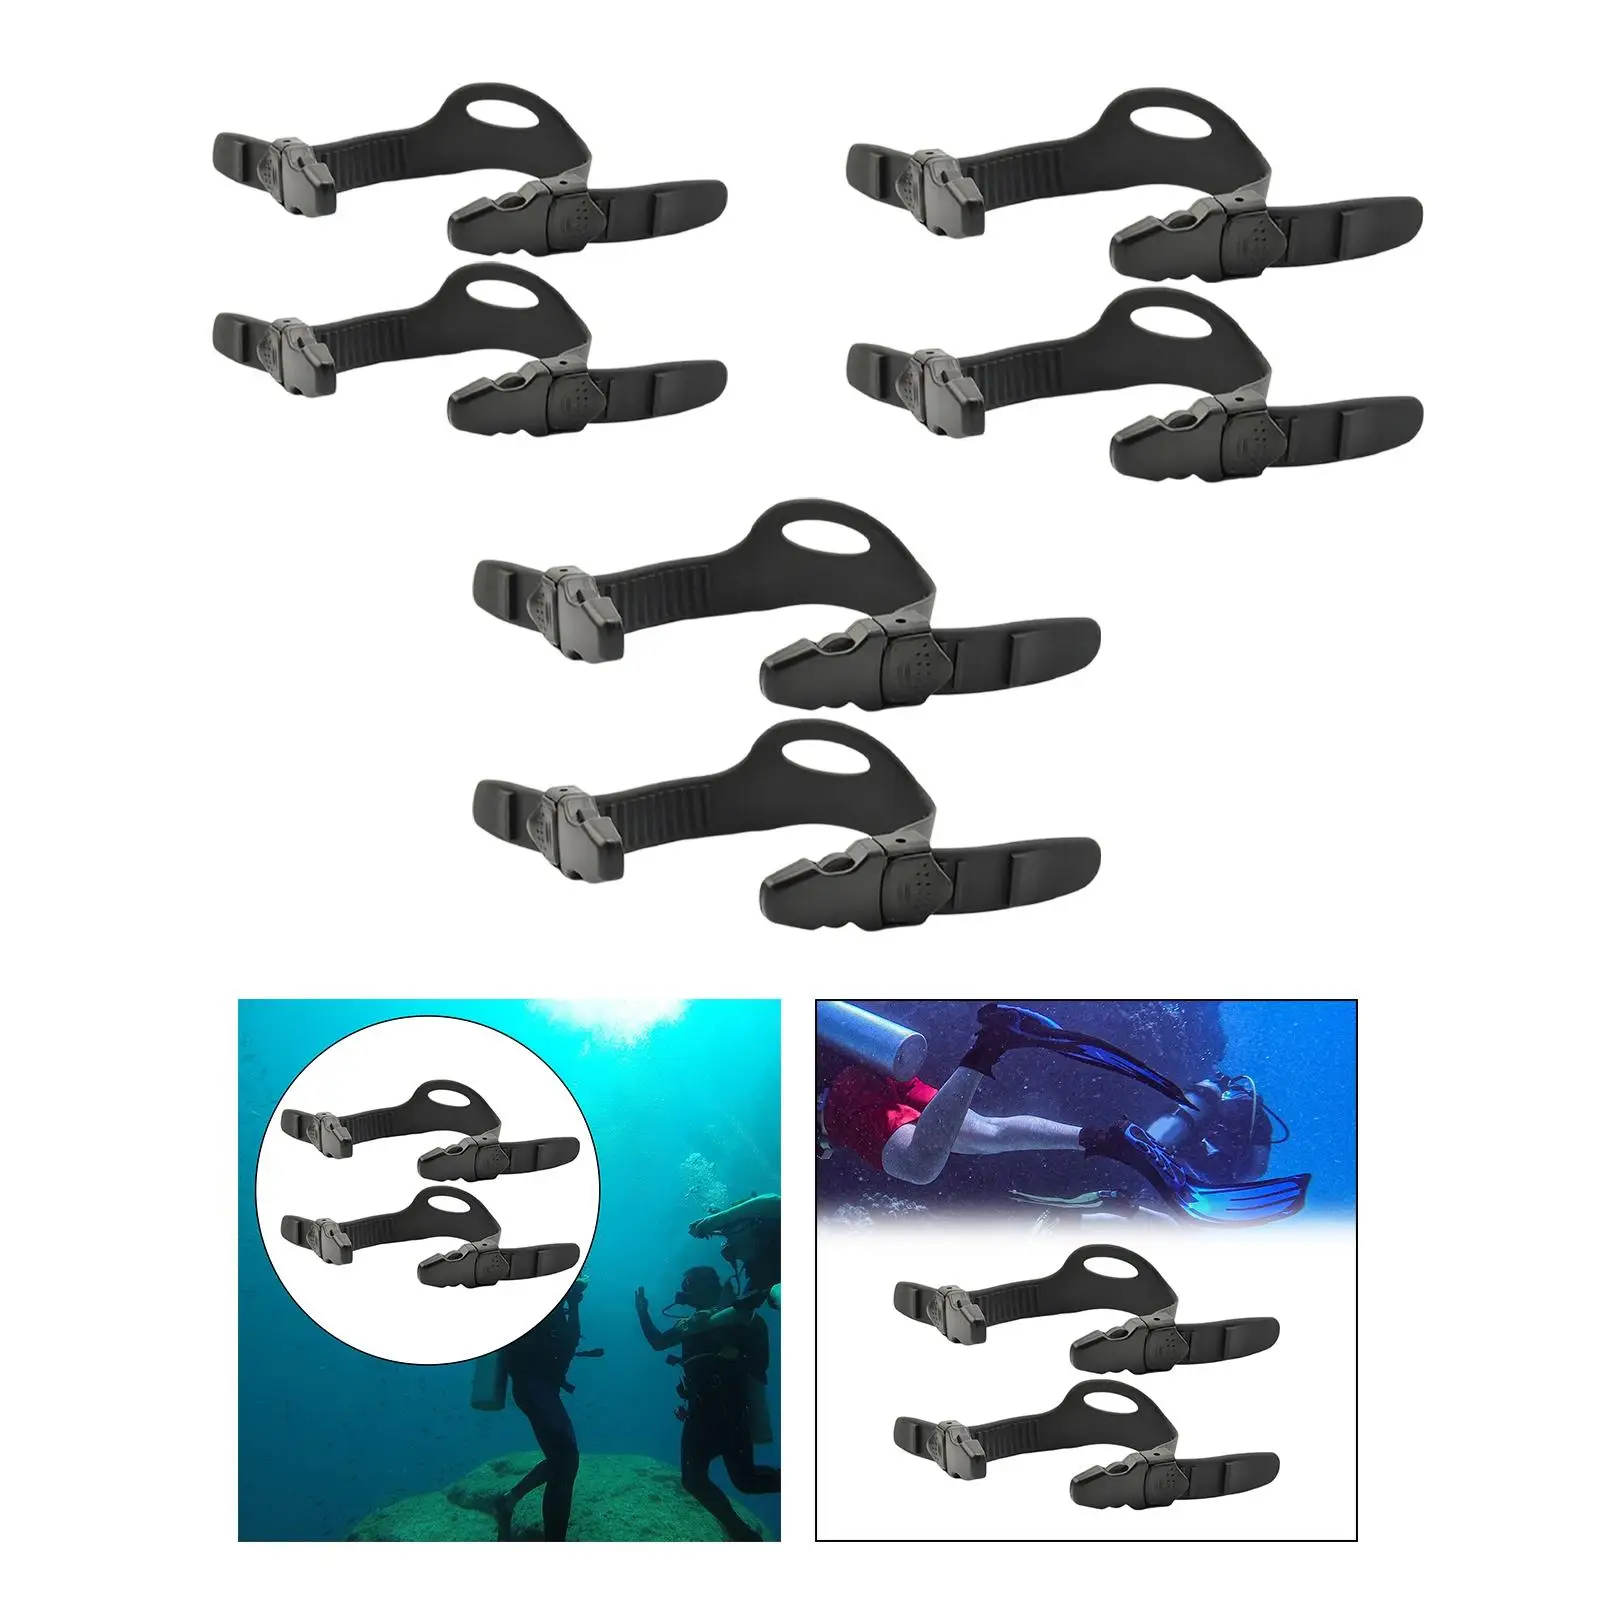 2 Pieces Universal Diving Quick Release Fin Straps Adjustable Set , Black Flipper for Scuba Open Back Fin Replacement Swimming